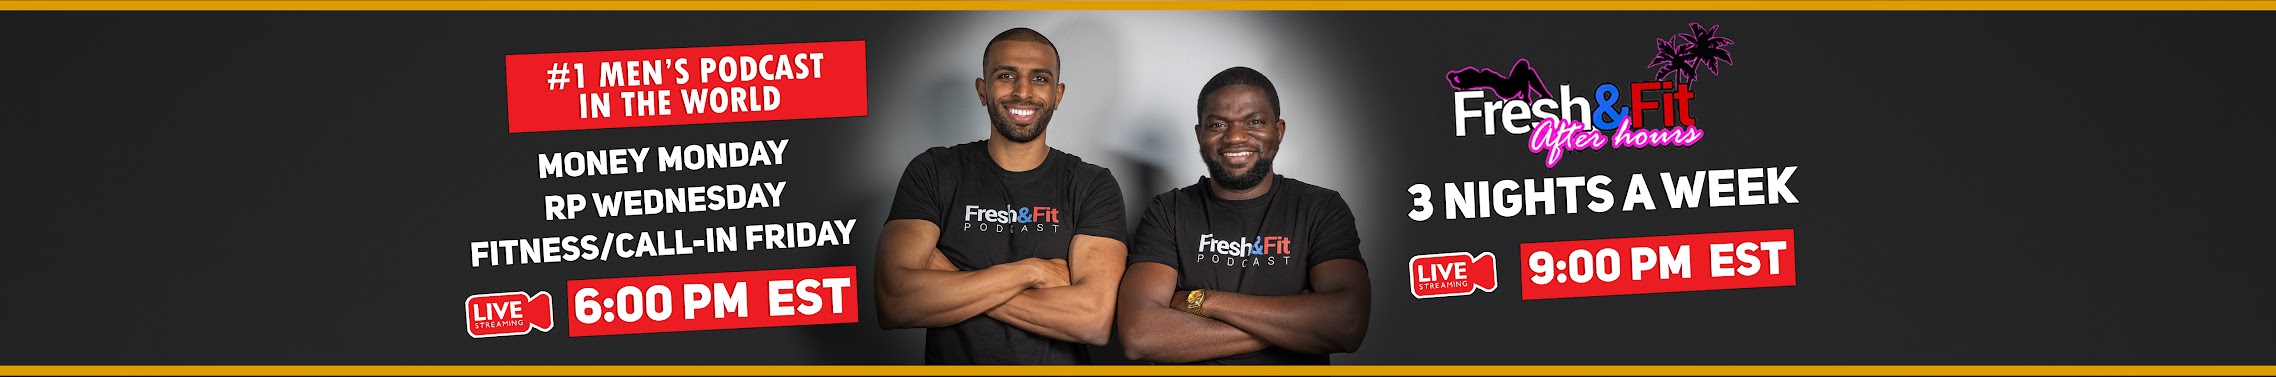 Fresh & Fit Is The Place For Men To Find Advice On Relationships, Finances  And Fitness